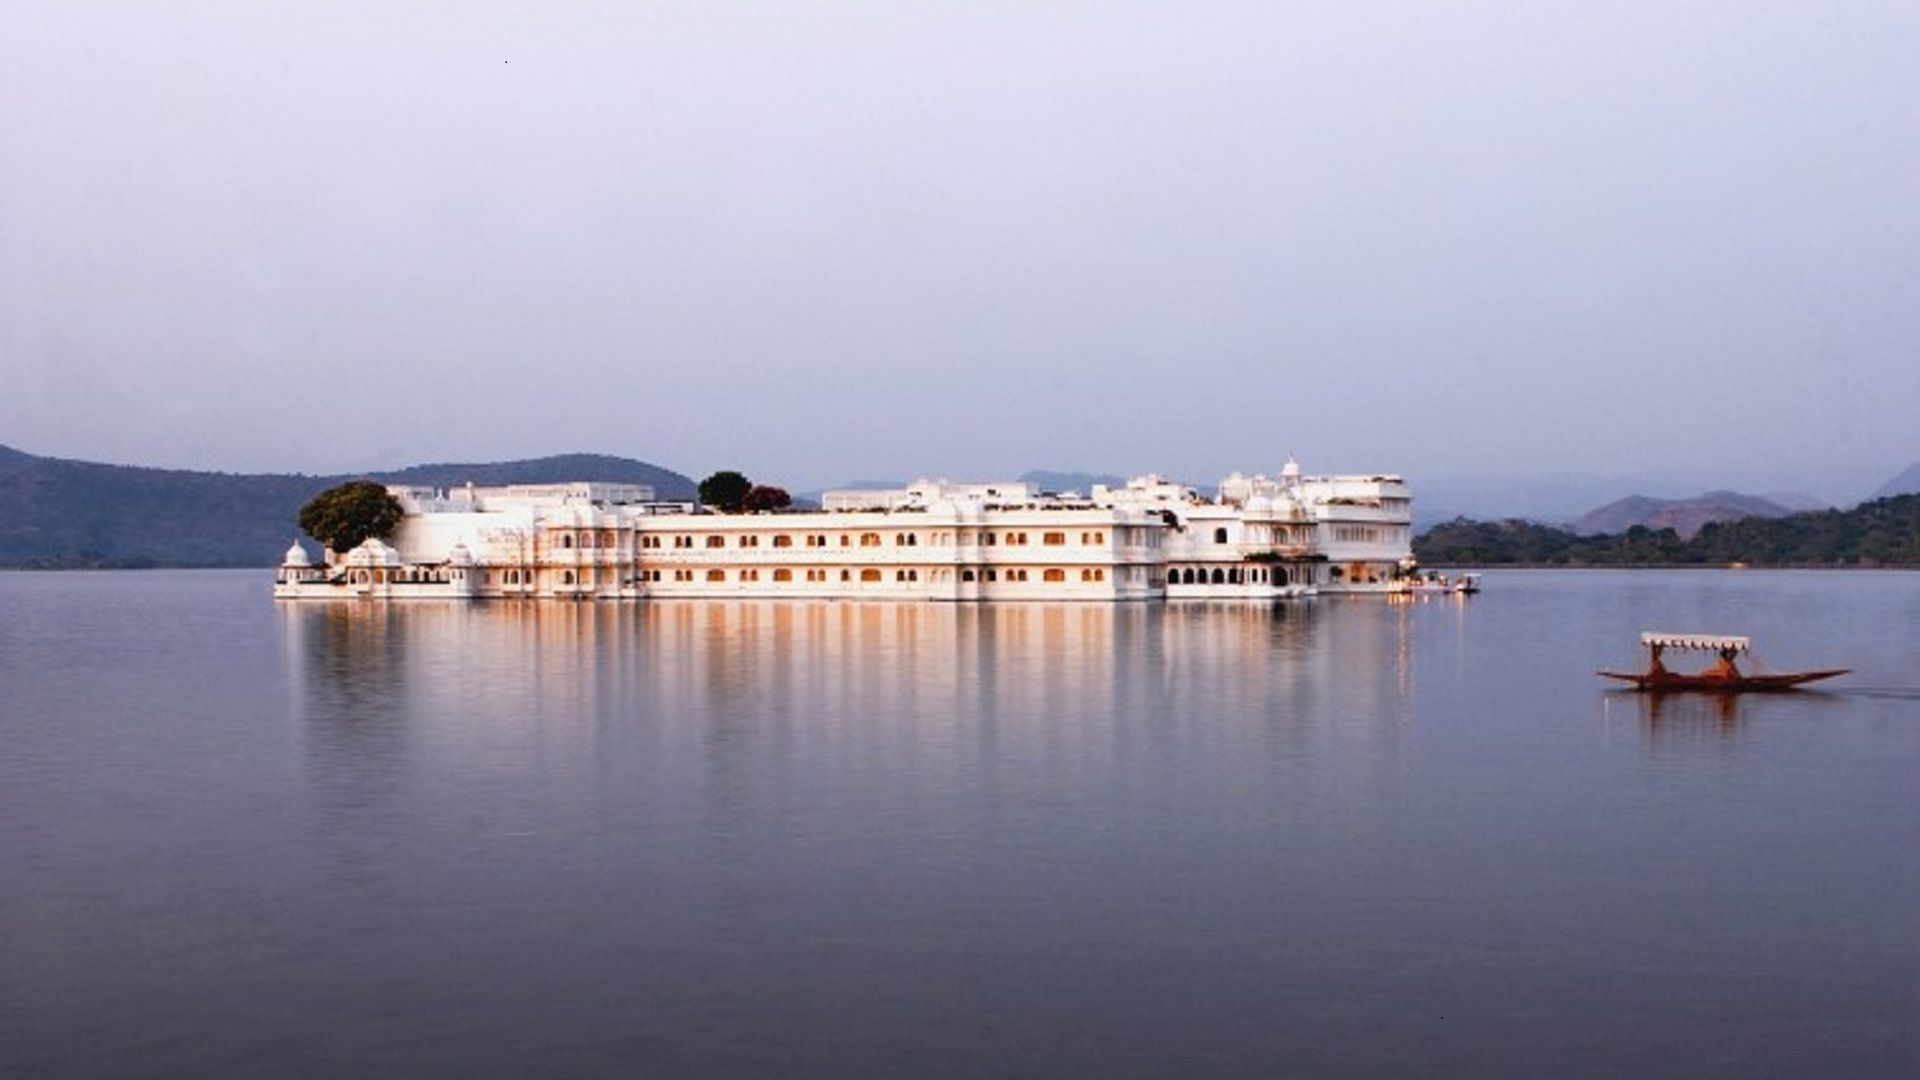 Taj Lake Palace - -- Best places to visit in Udaipur, a royal city blessed with many tourist attractions